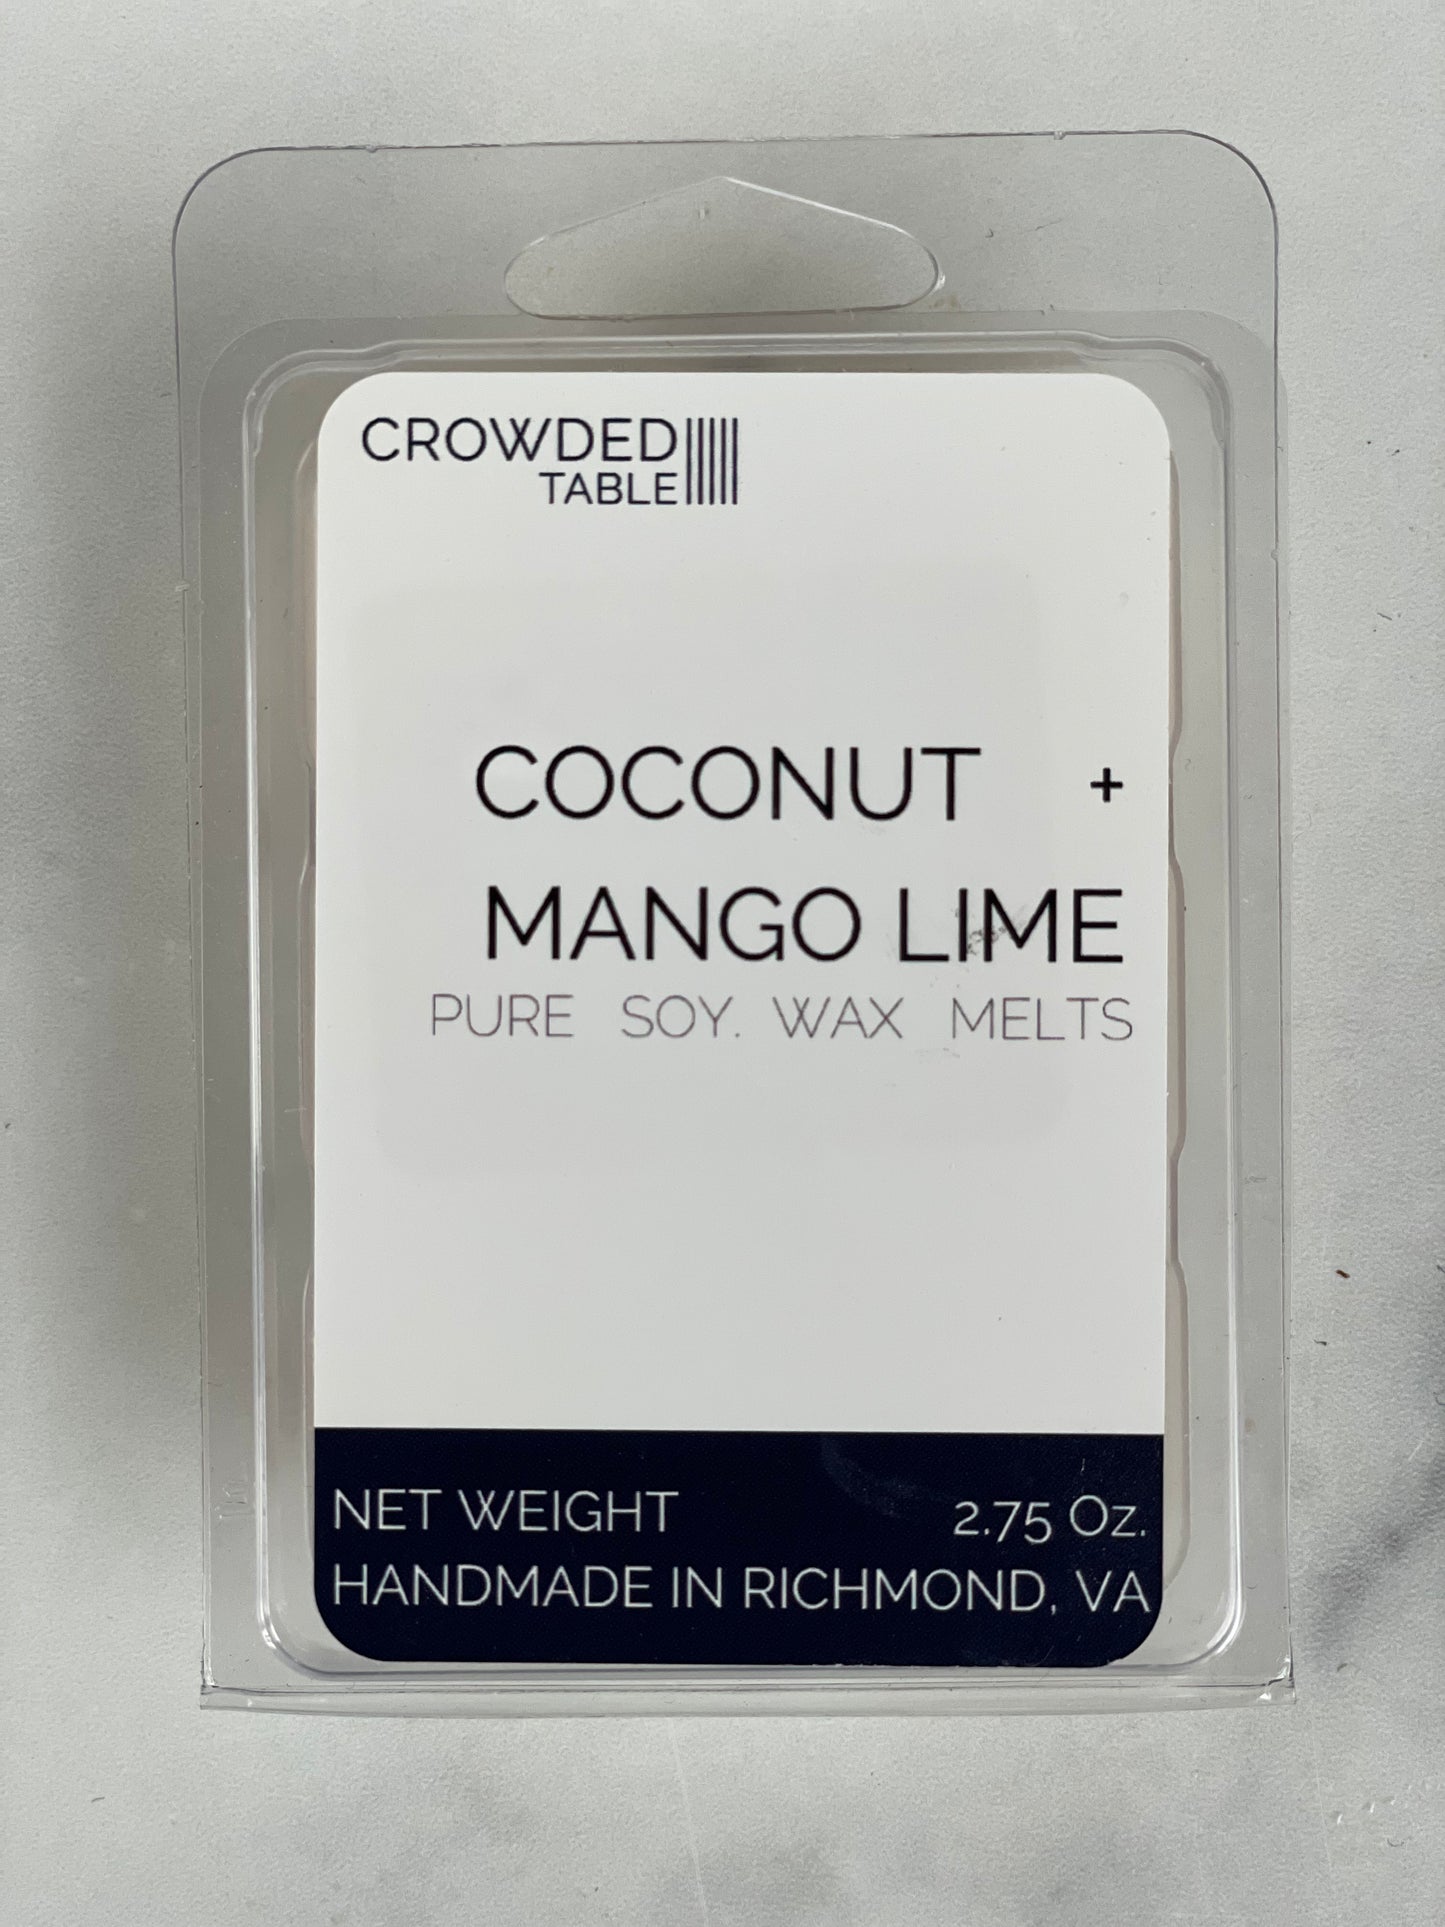 Coconut + Mango Lime 10 oz. Pure Soy Wax Candle